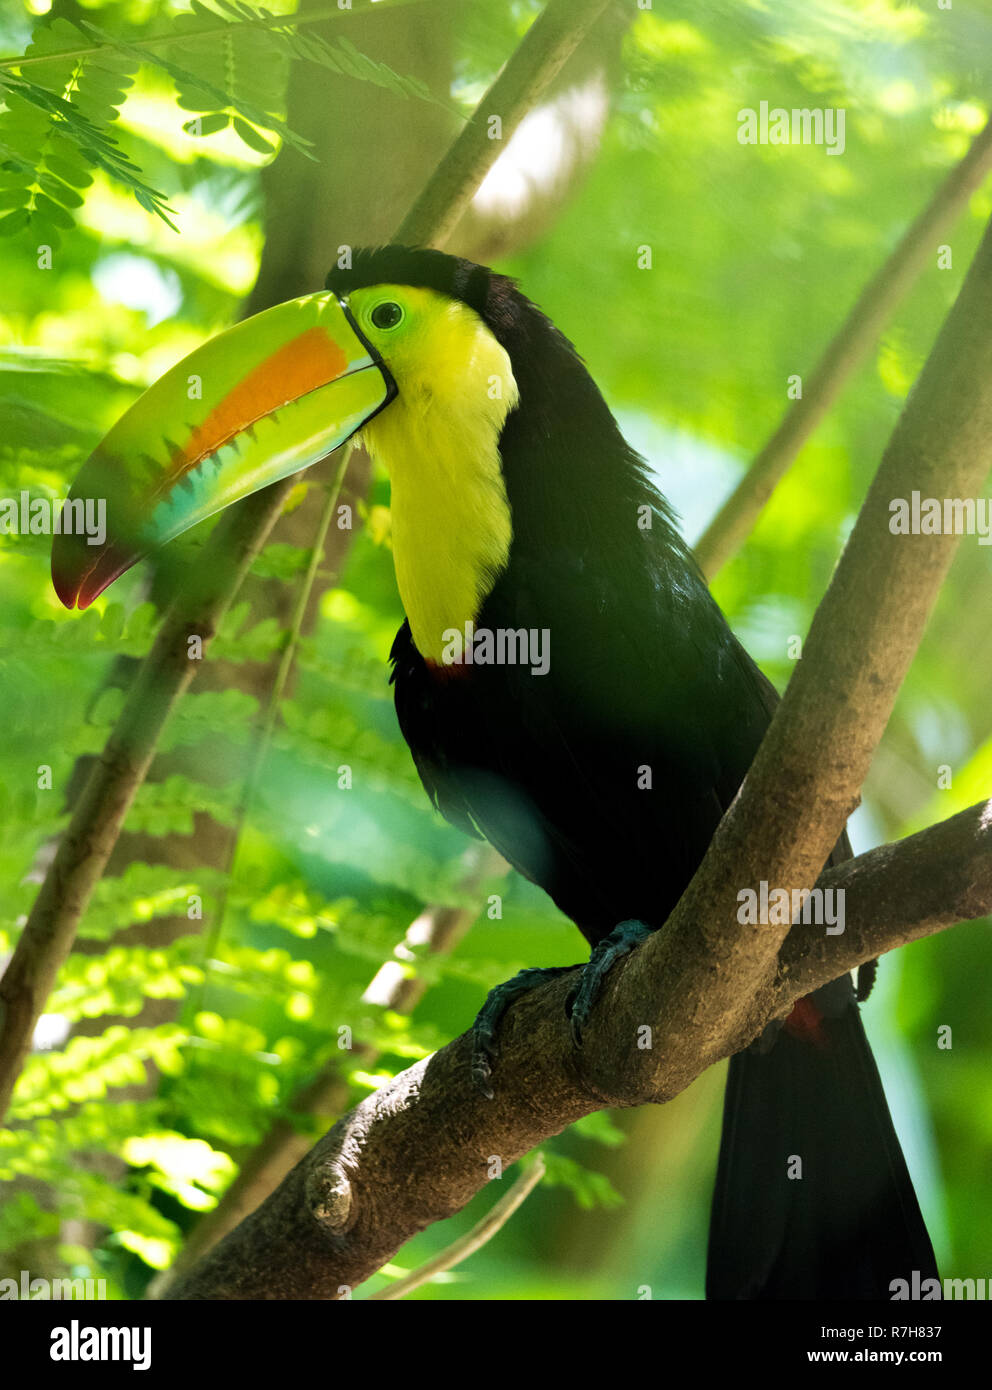 Keel billed toucan (Ramphastos sulfuratus), AKA sulfur breasted or rainbow billed toucan.  Latin American member of the toucan family. Stock Photo